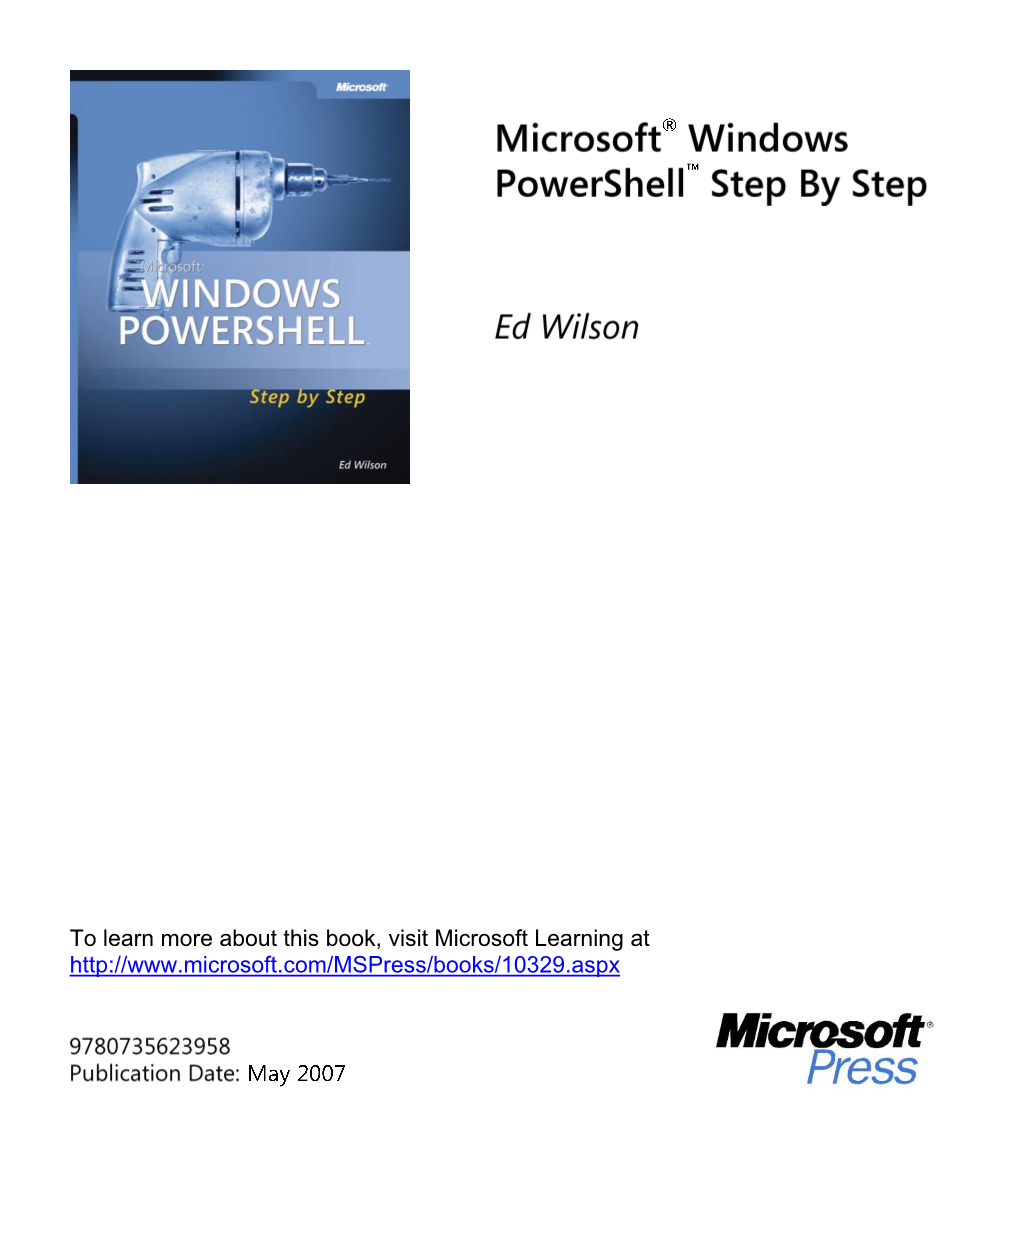 Sample Content from Microsoft Windows Powershell Step by Step